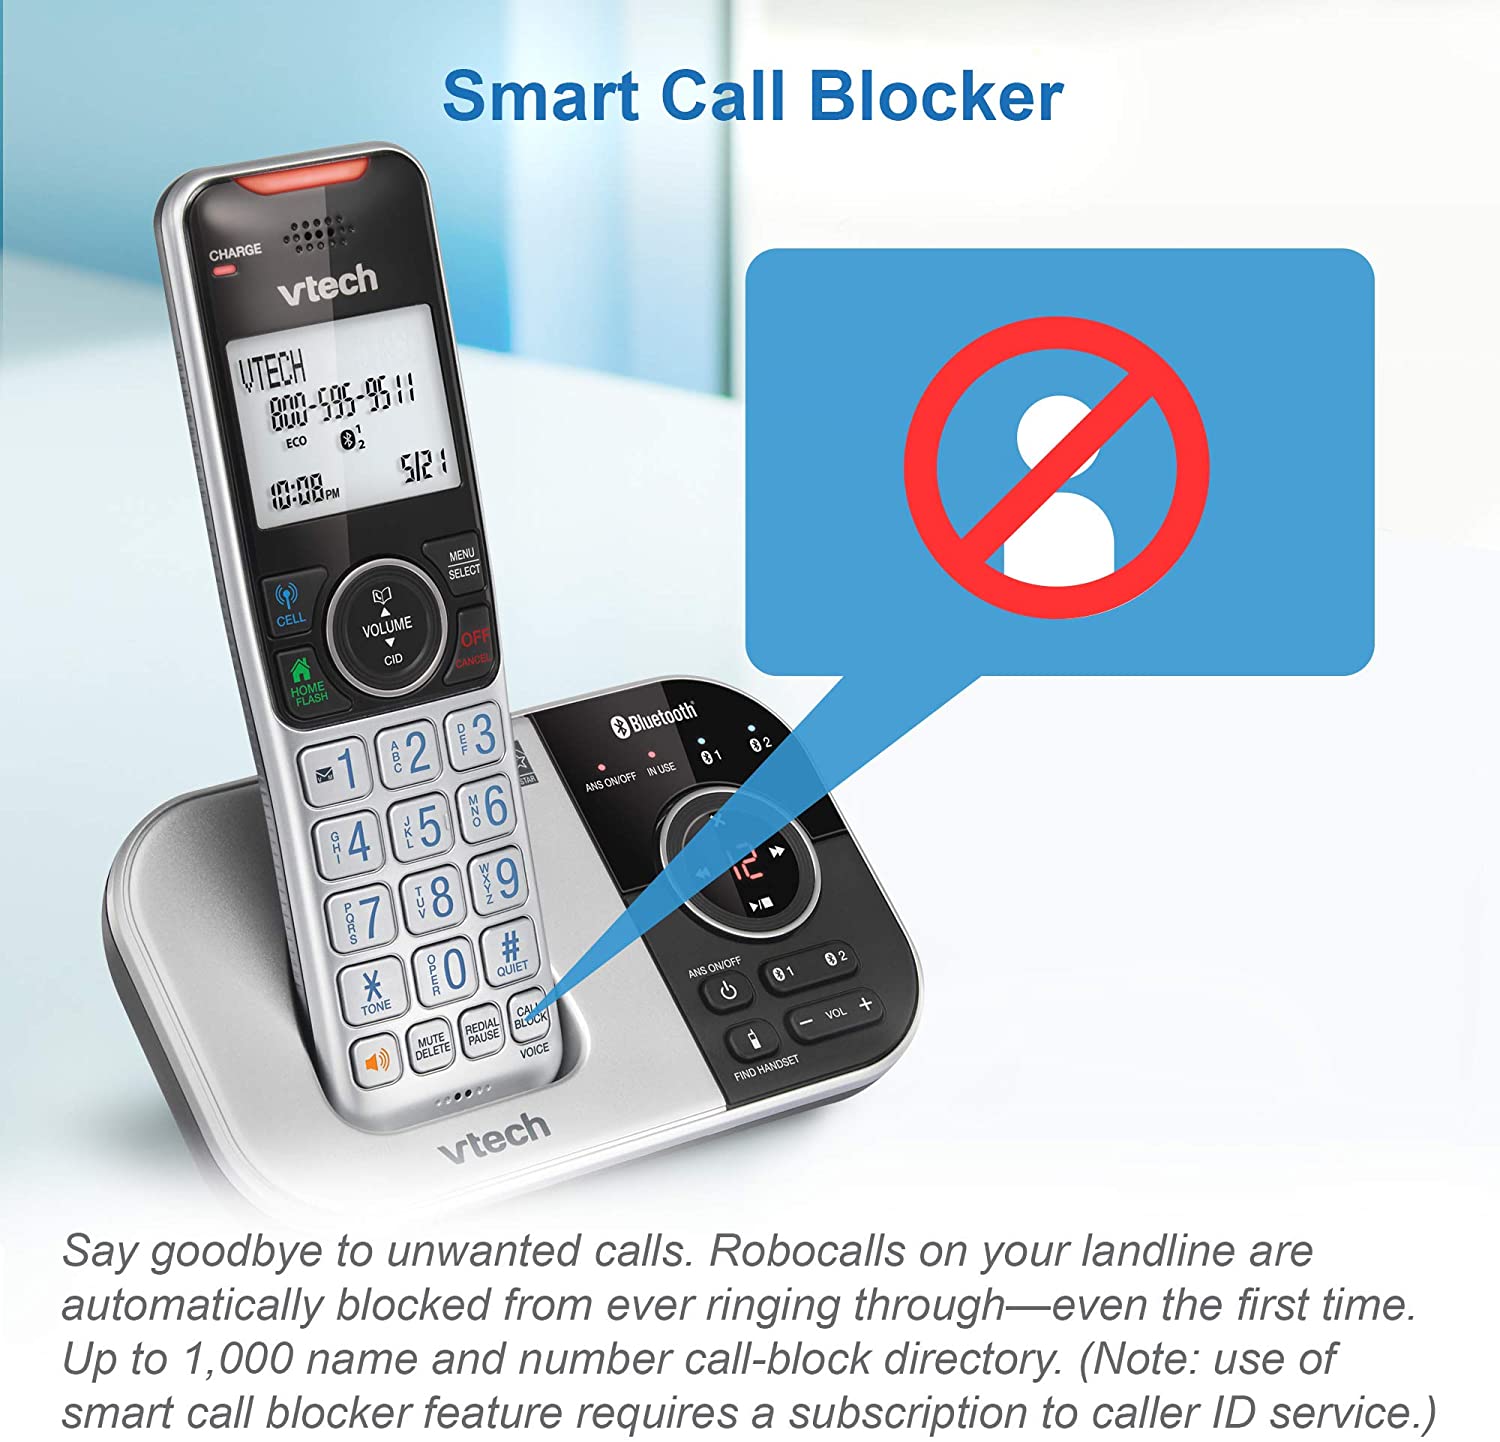 VS112-0 Silver & Black VTech Accessory Handset with Bluetooth Connect to Cell and Smart Call Blocker 